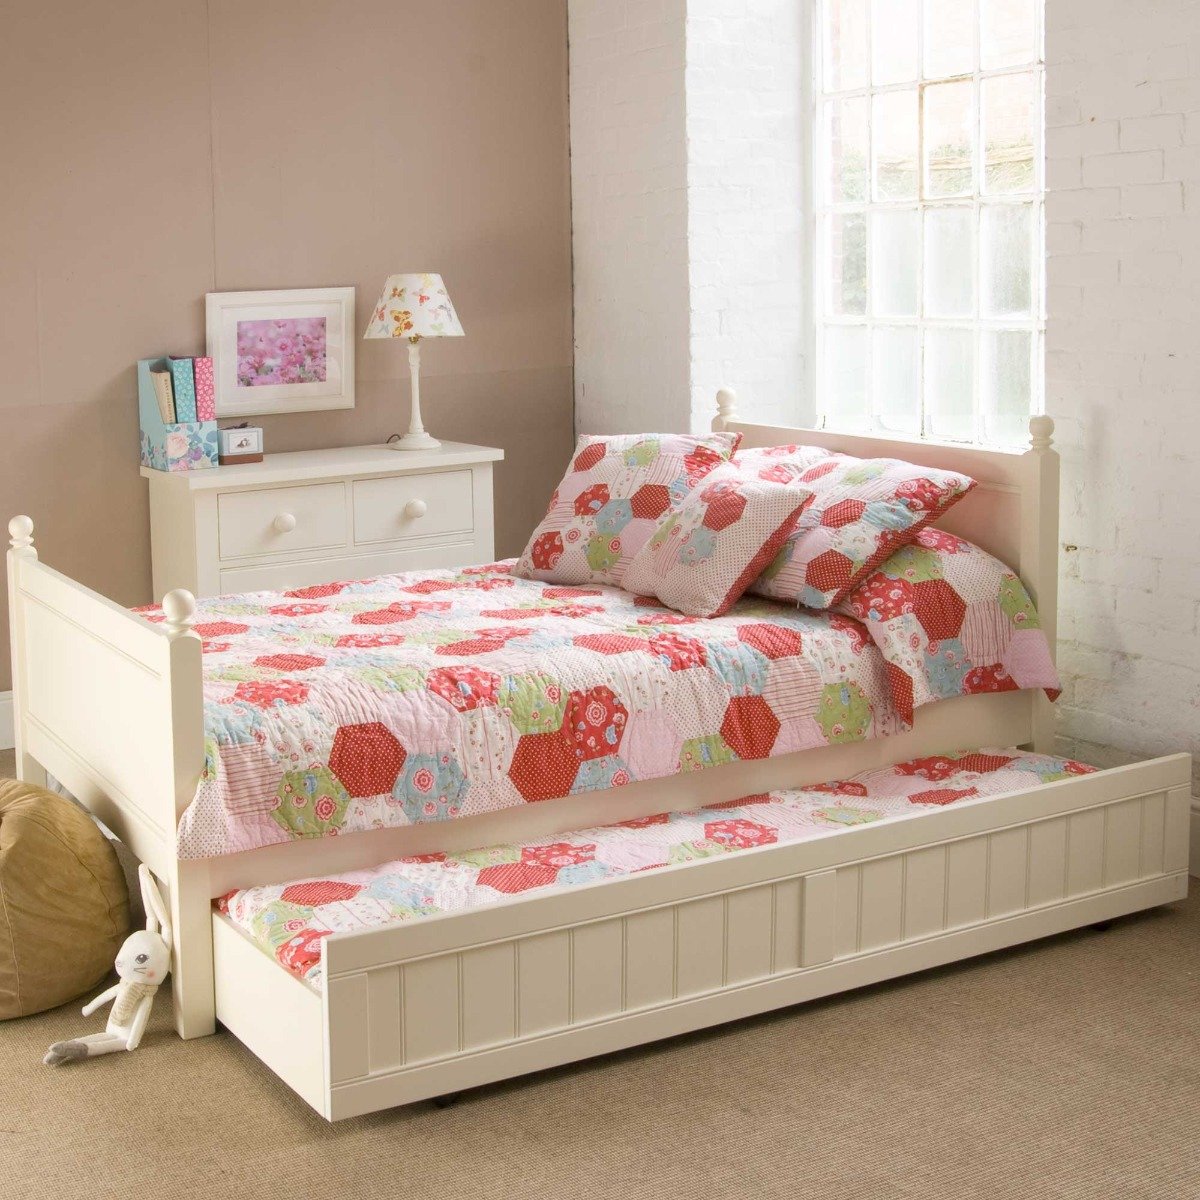 Pippin Small Double Bed With Trundle, White Wood | Barker & Stonehouse